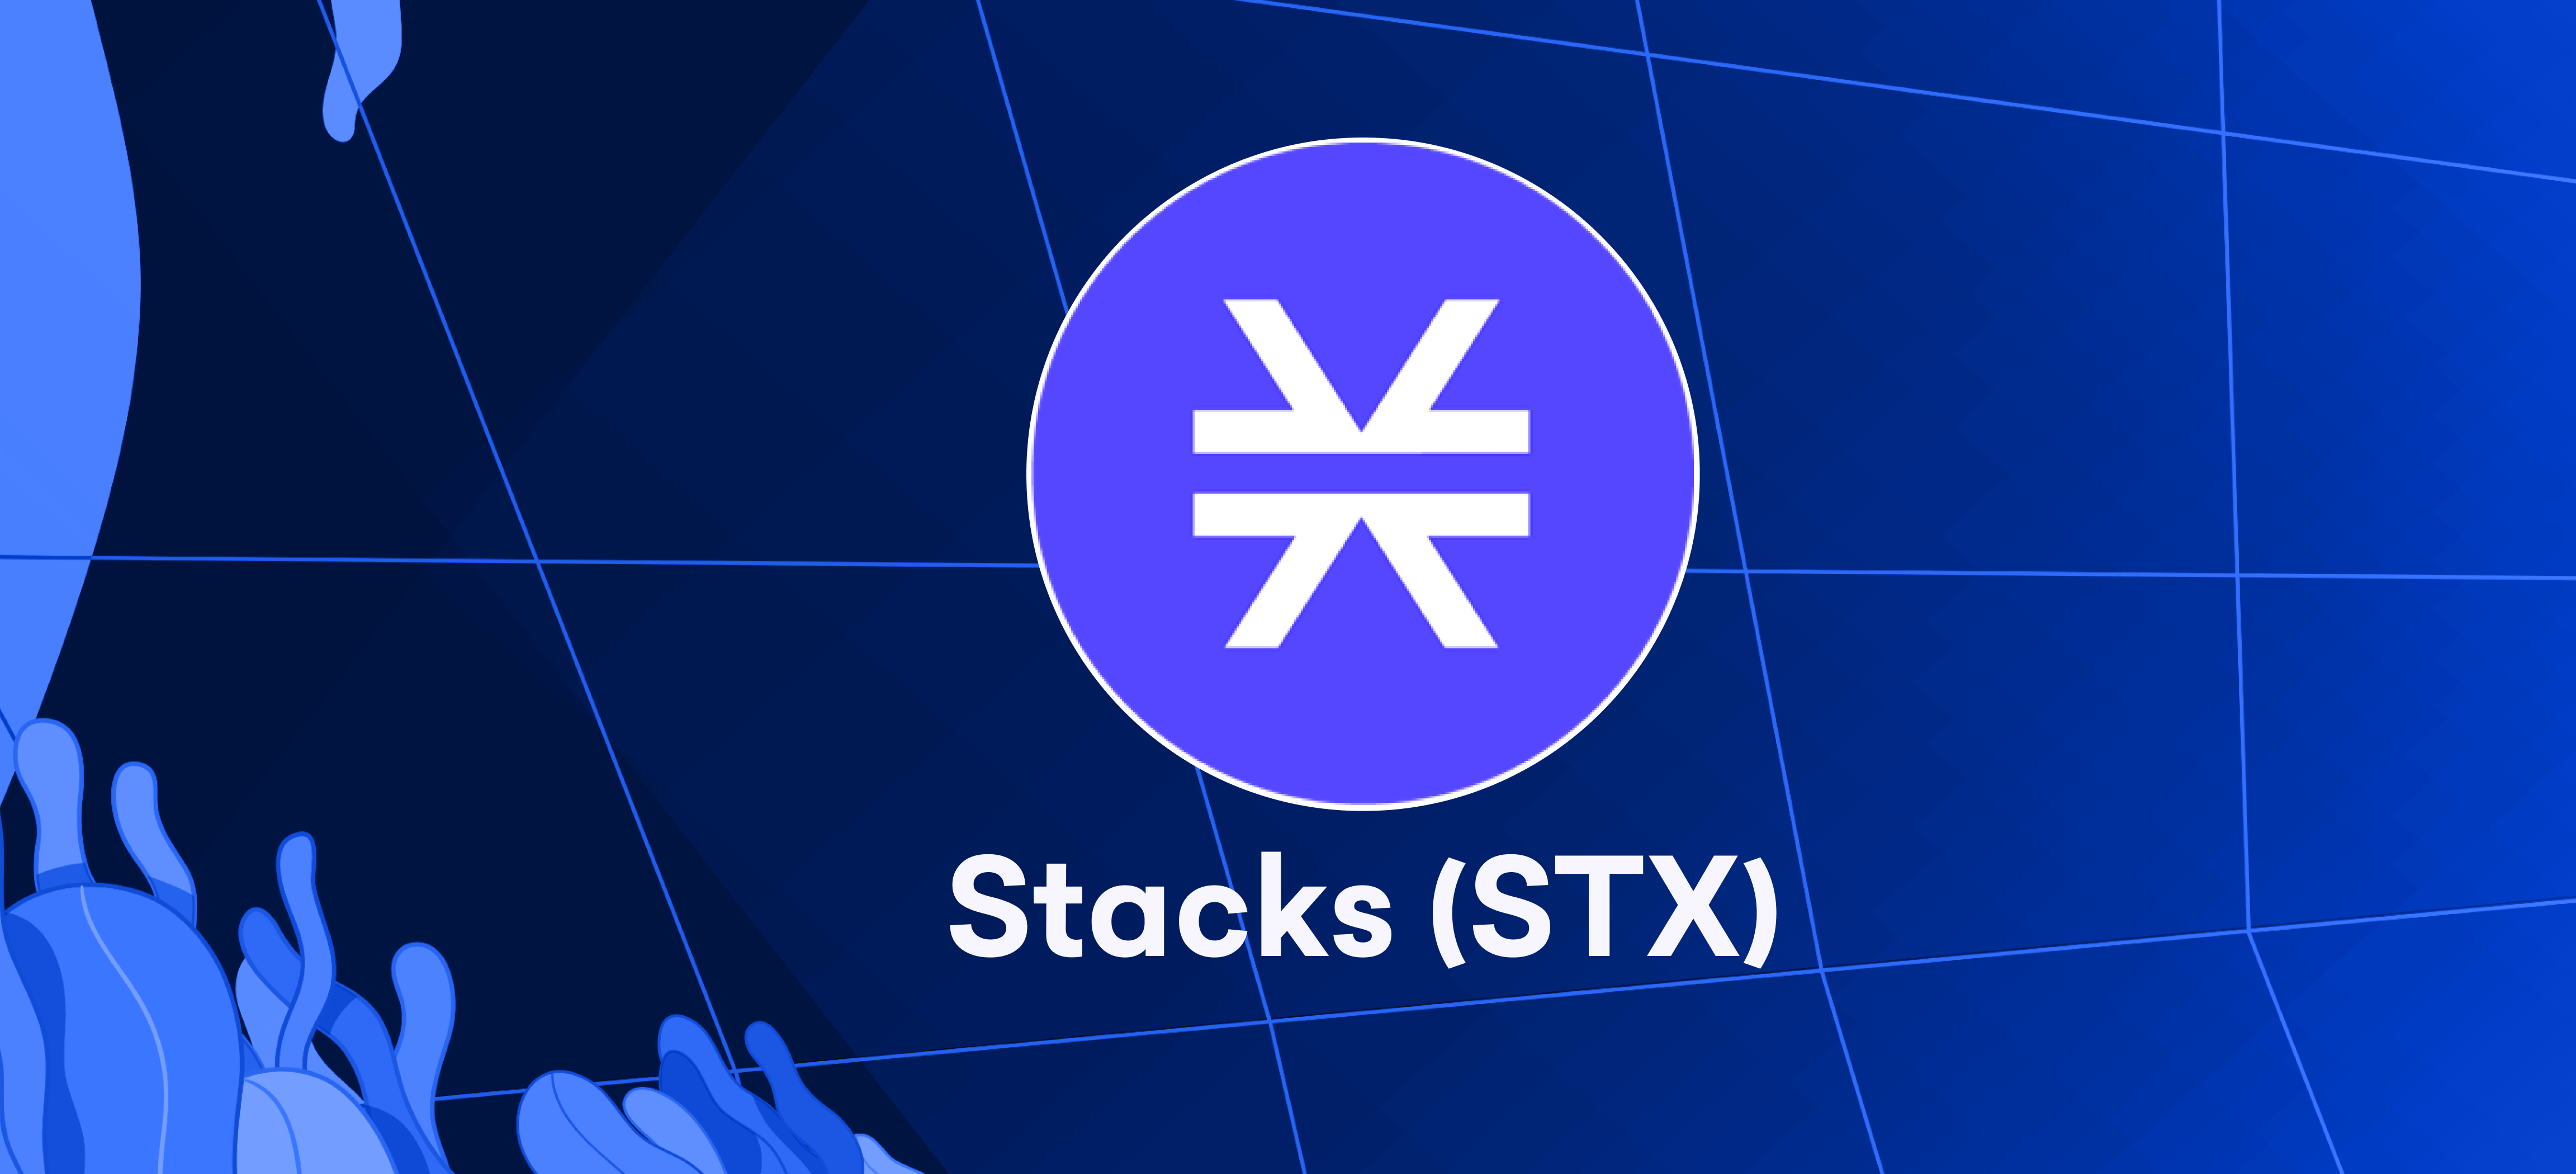 Stacks Price | (STX) Price and Live Chart - CoinDesk